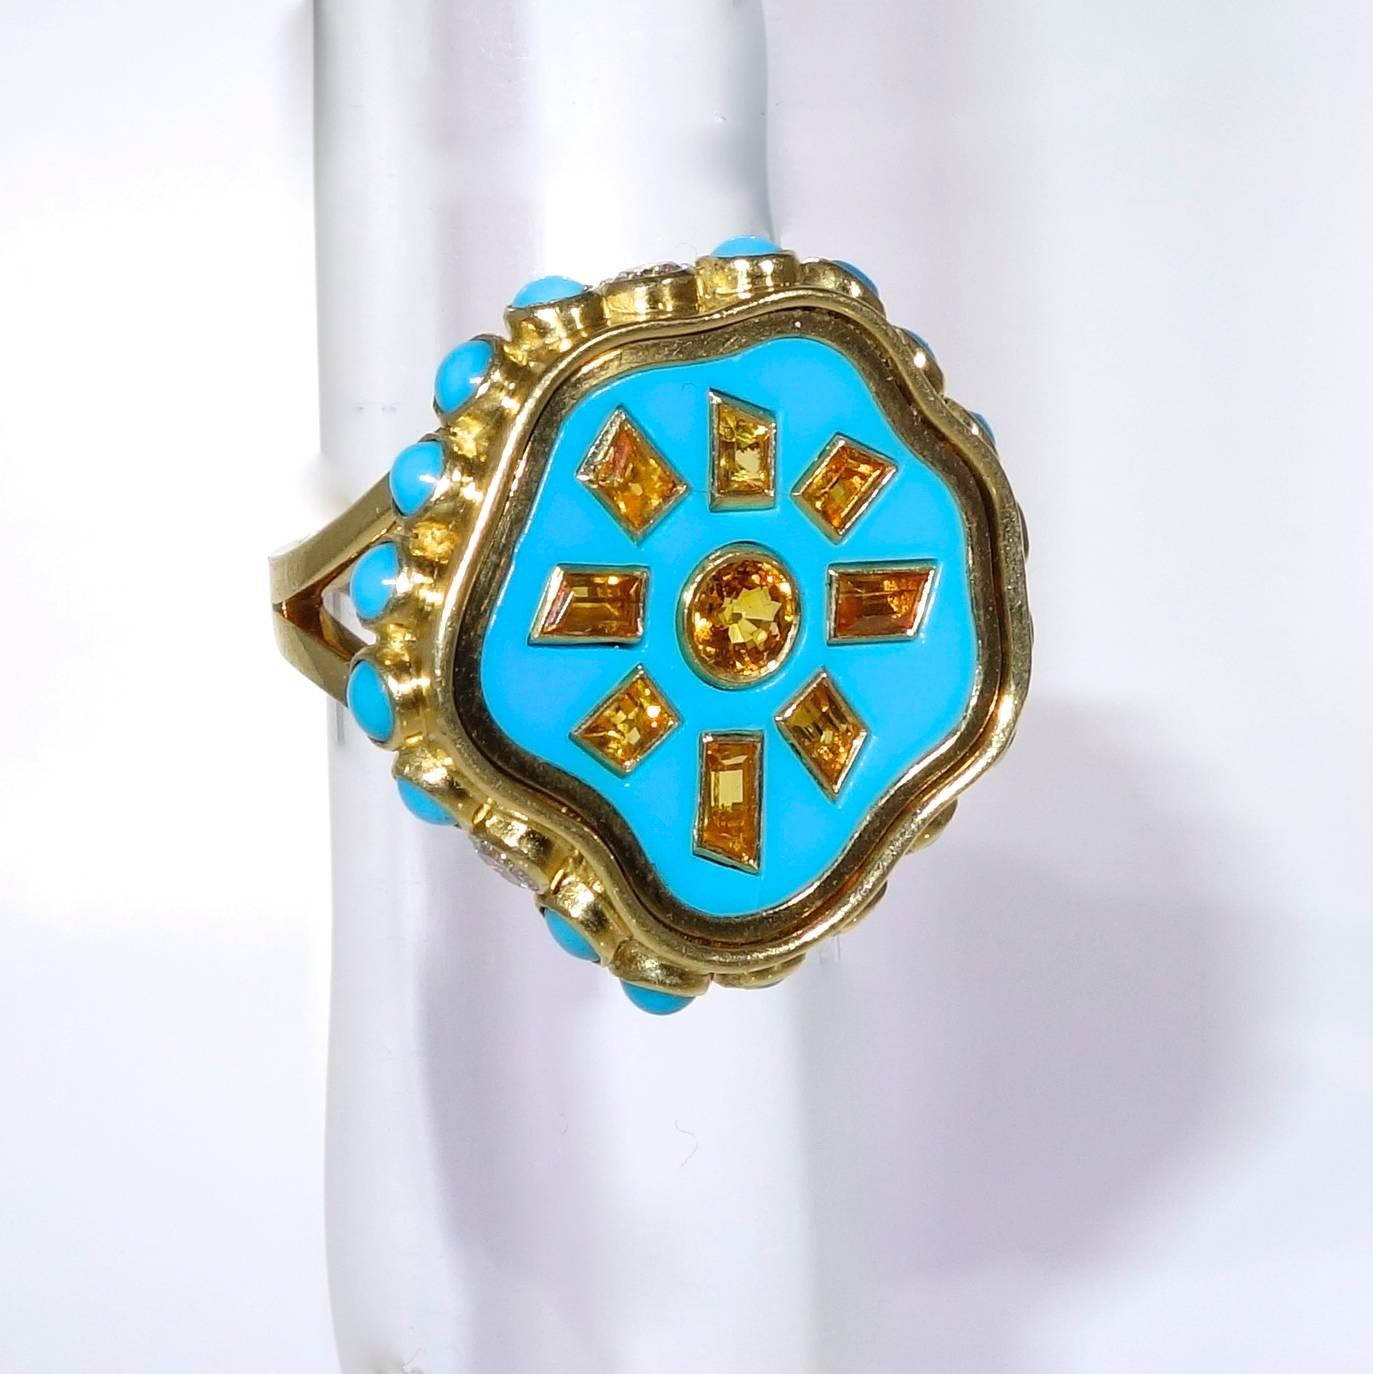   There are 17 turquoise weighing approximately .85 ct,s and 3 fine round brilliant cut diamonds weighing approximately .09 cts.  This ring bears English hallmarks for London 2010.  It is now a size 7.5 and we can size it easily. The width of this